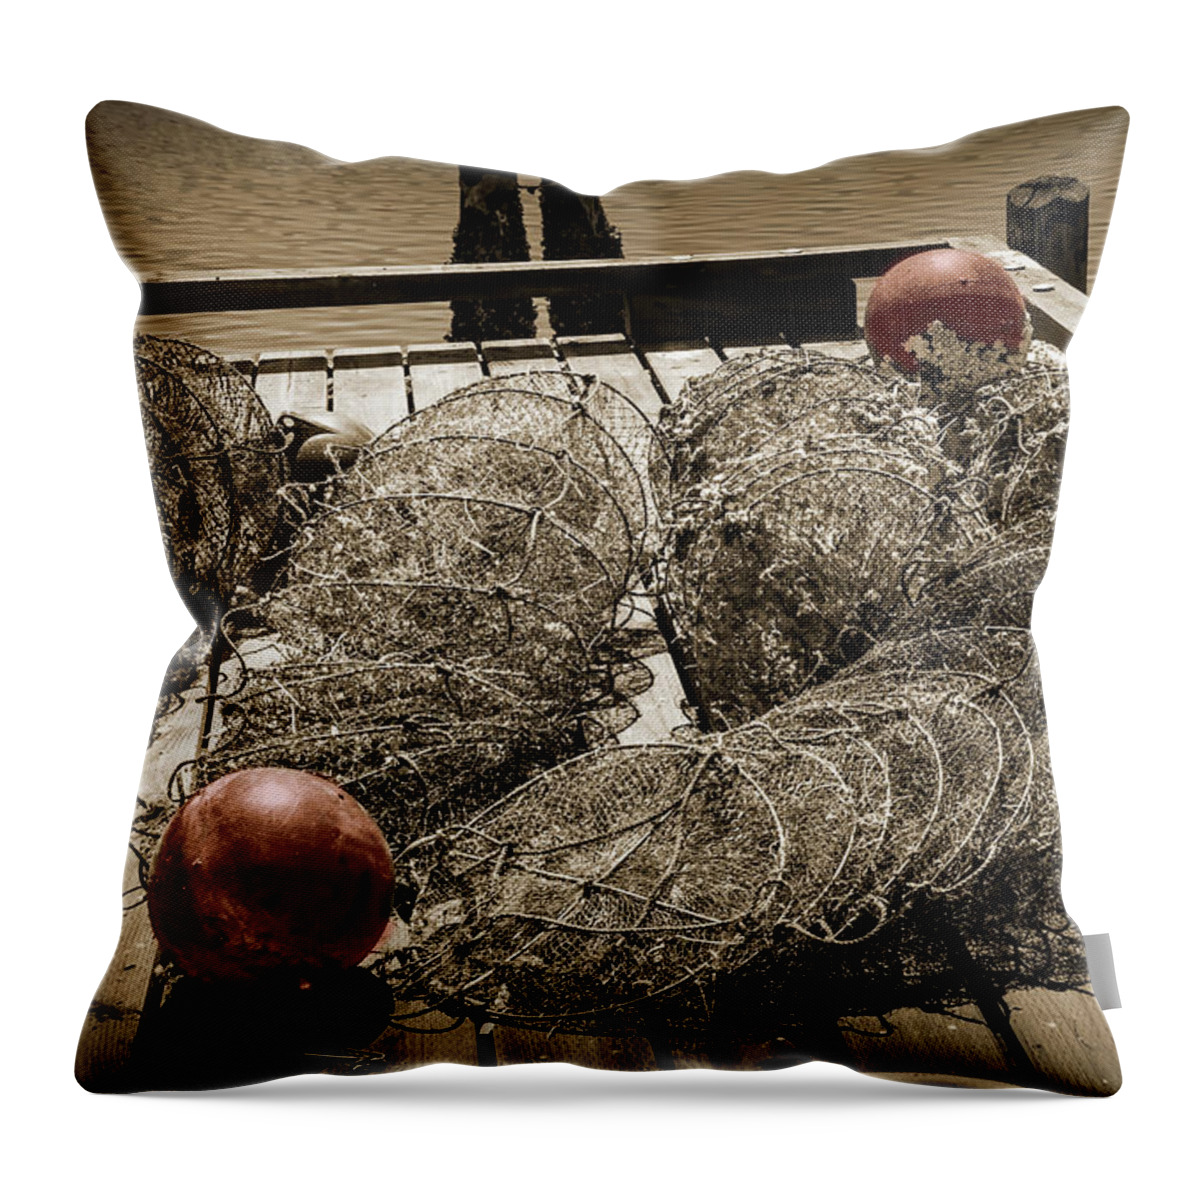 Oyster-farm Throw Pillow featuring the photograph Nets And Balls by Kirt Tisdale